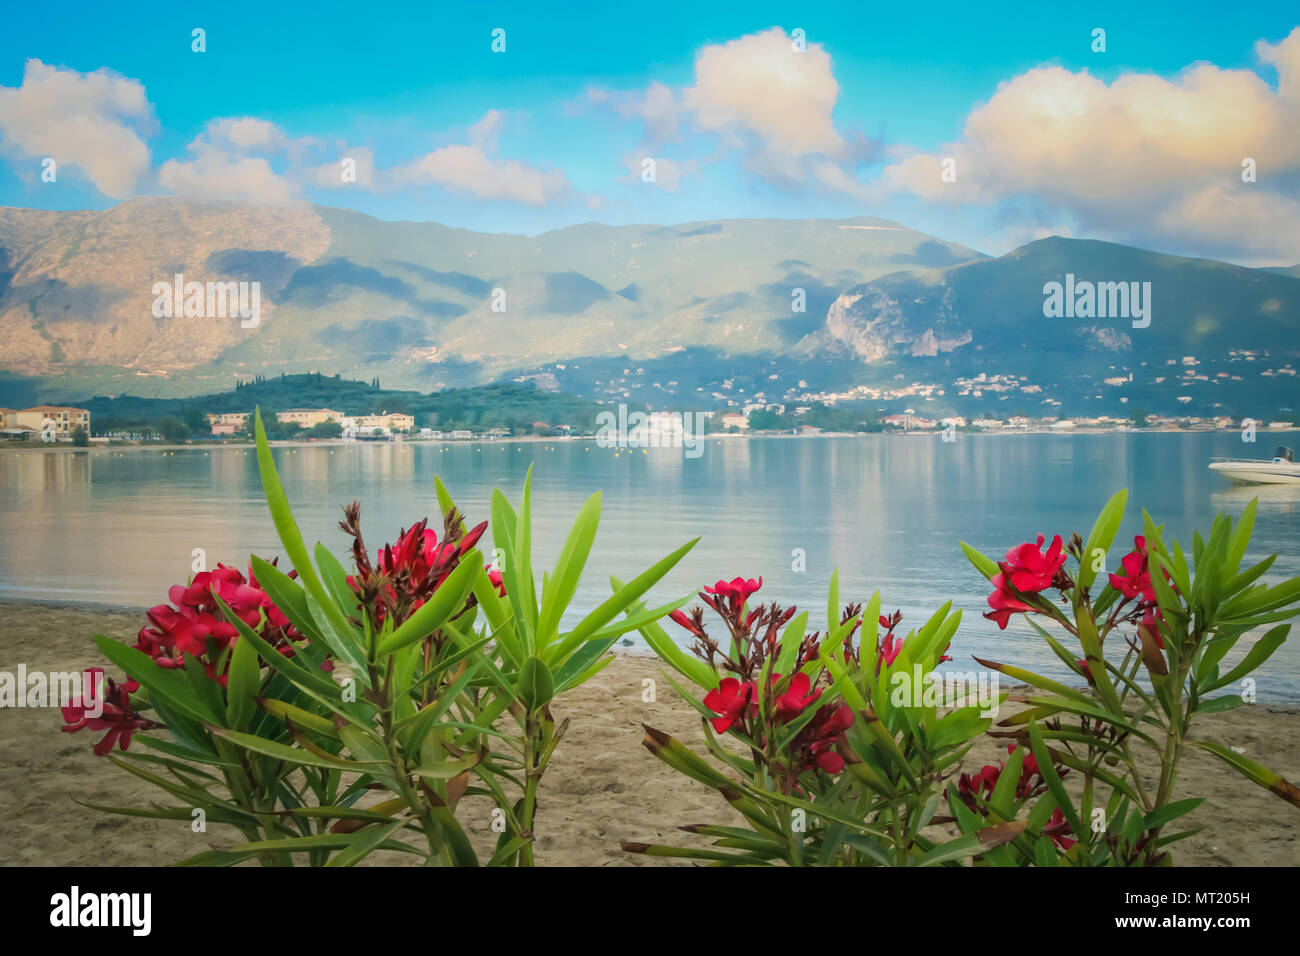 View across the sea to Zante from Alykanas in Greece. Part of the Ionain islands. Retro Colouring subtley applied. Stock Photo